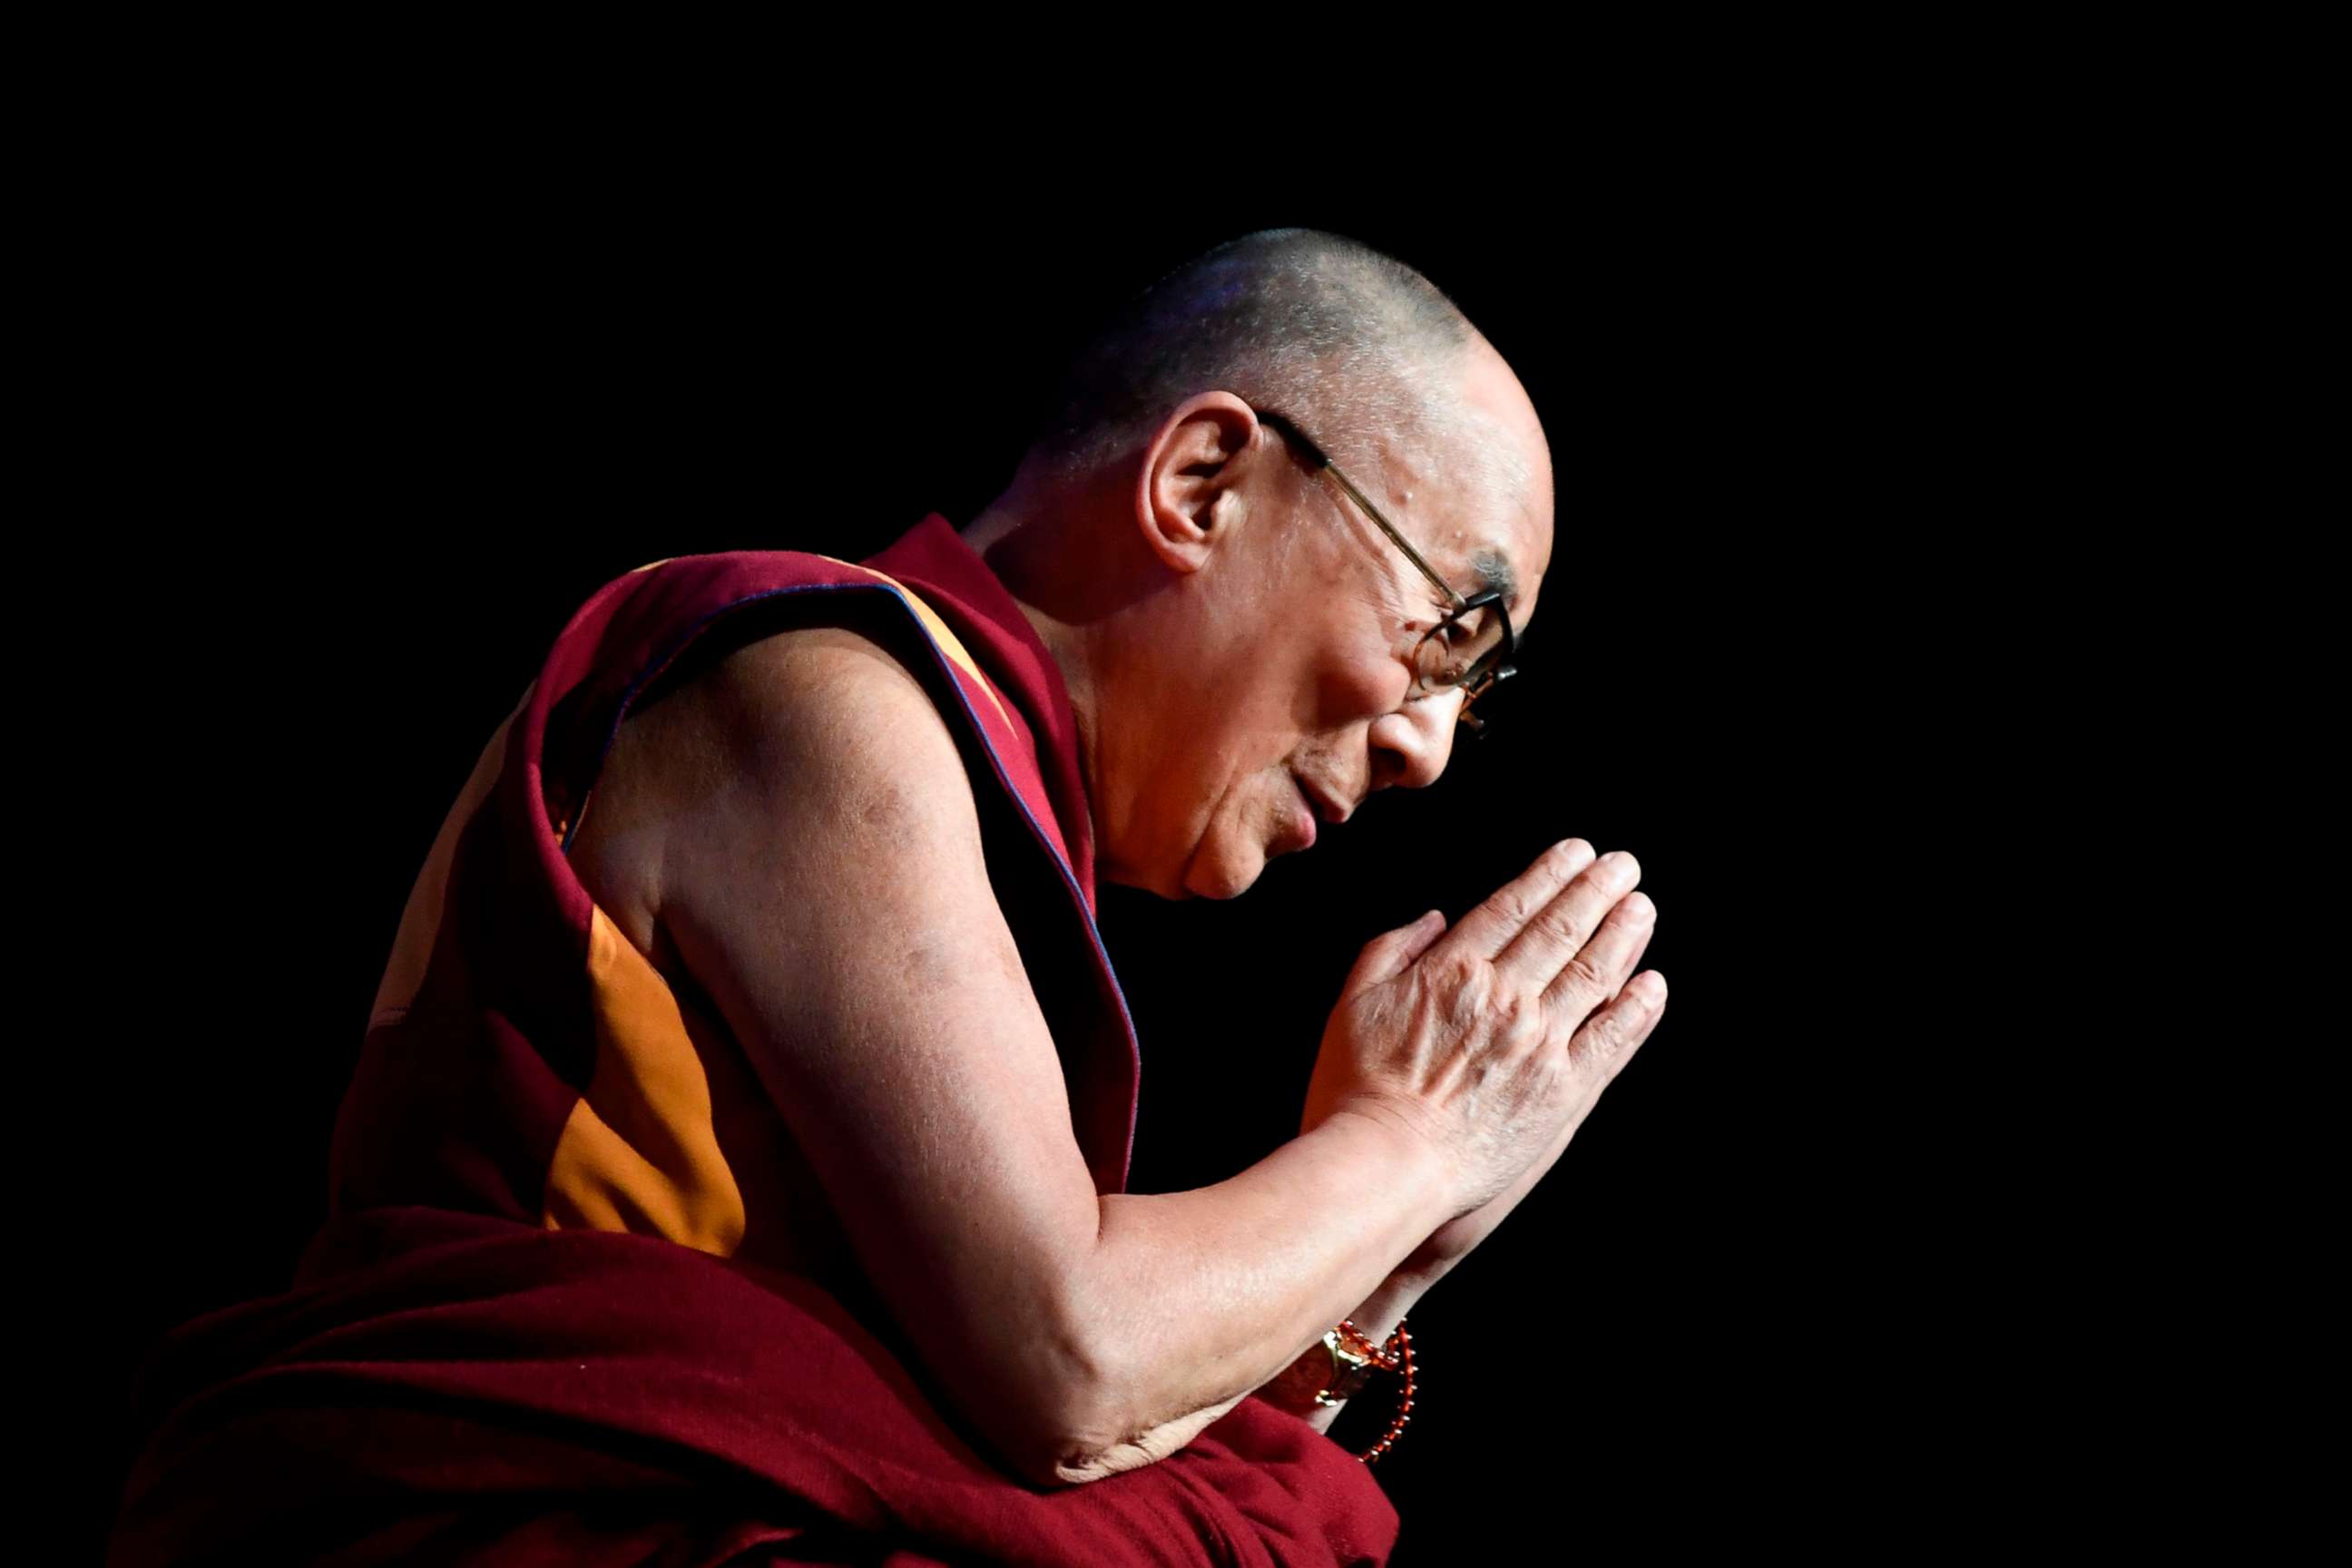 PHOTO: In this file photo taken on Sept 13, 2016 the Dalai Lama gestures during a group hearing at the Palais des Congres, in Paris.